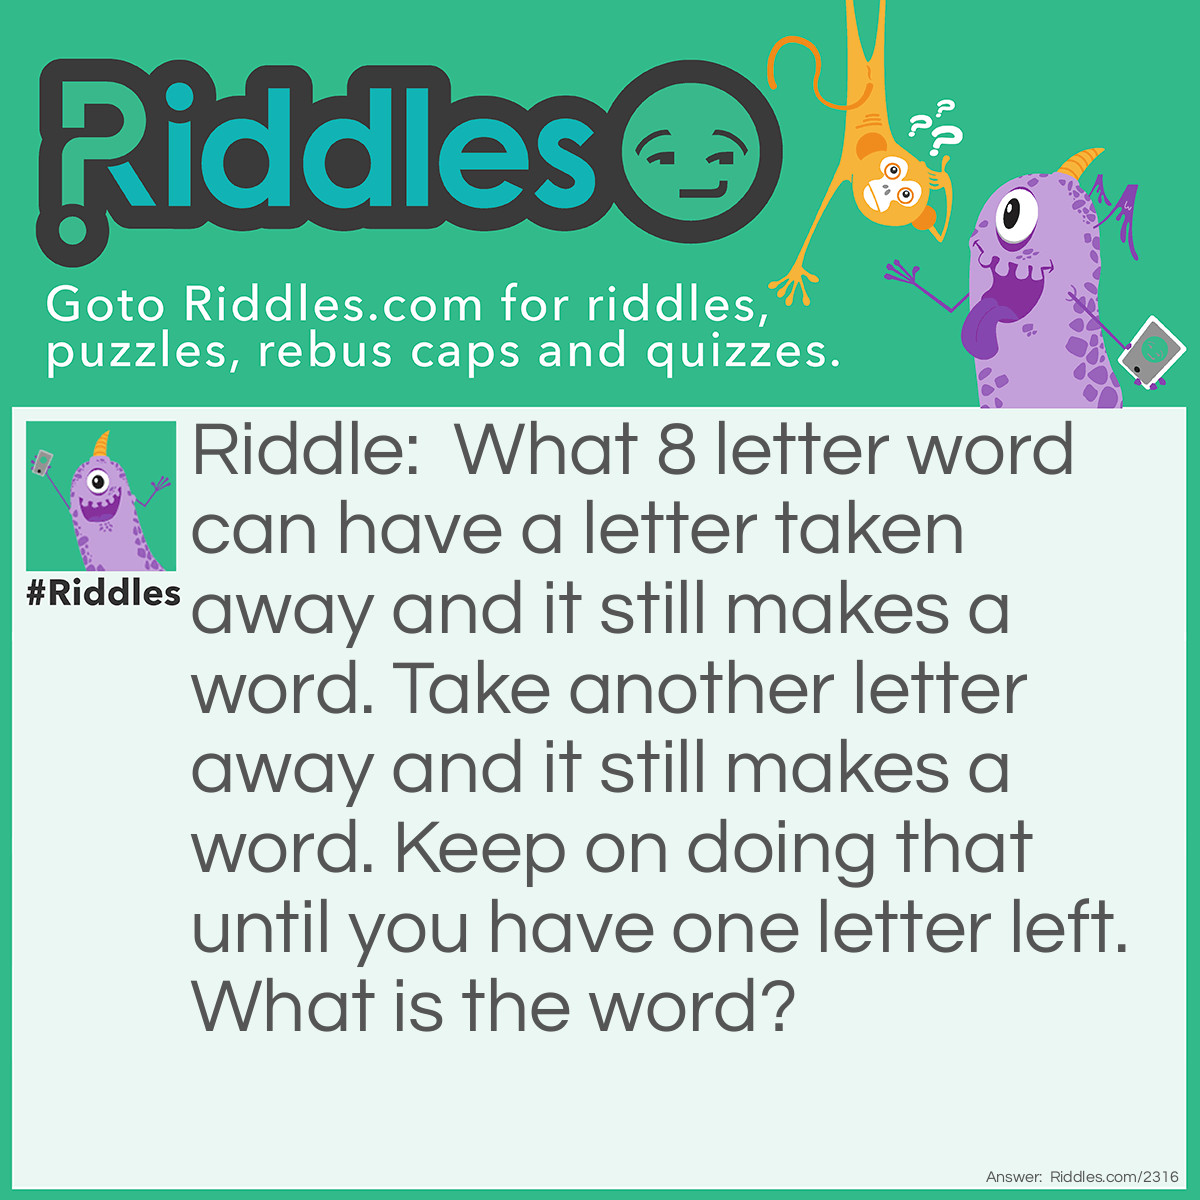 Riddle: What 8 letter word can have a letter taken away and it still makes a word. Take another letter away and it still makes a word. Keep on doing that until you have one letter left. What is the word? Answer: The word is starting! starting, staring, string, sting, sing, sin, in, I.  Cool,huh?